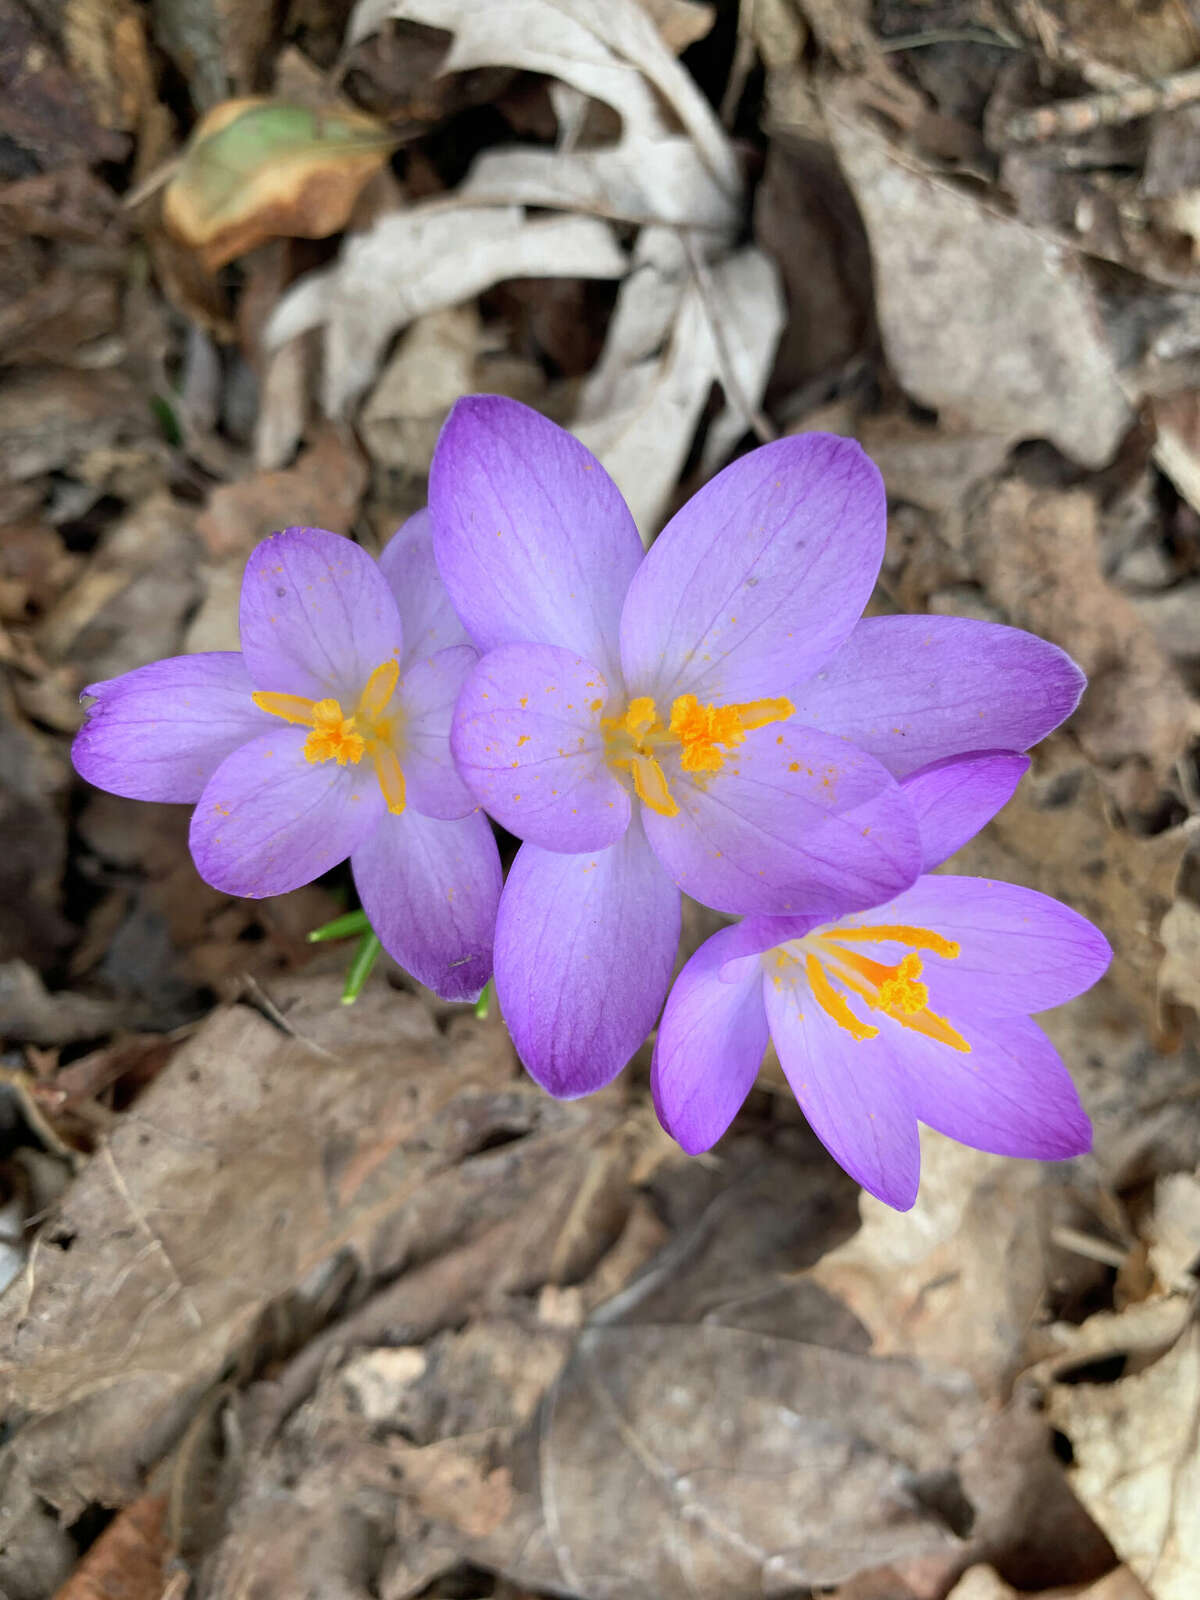 Crocuses were popping up along the sidewalk on First Street in Manistee.